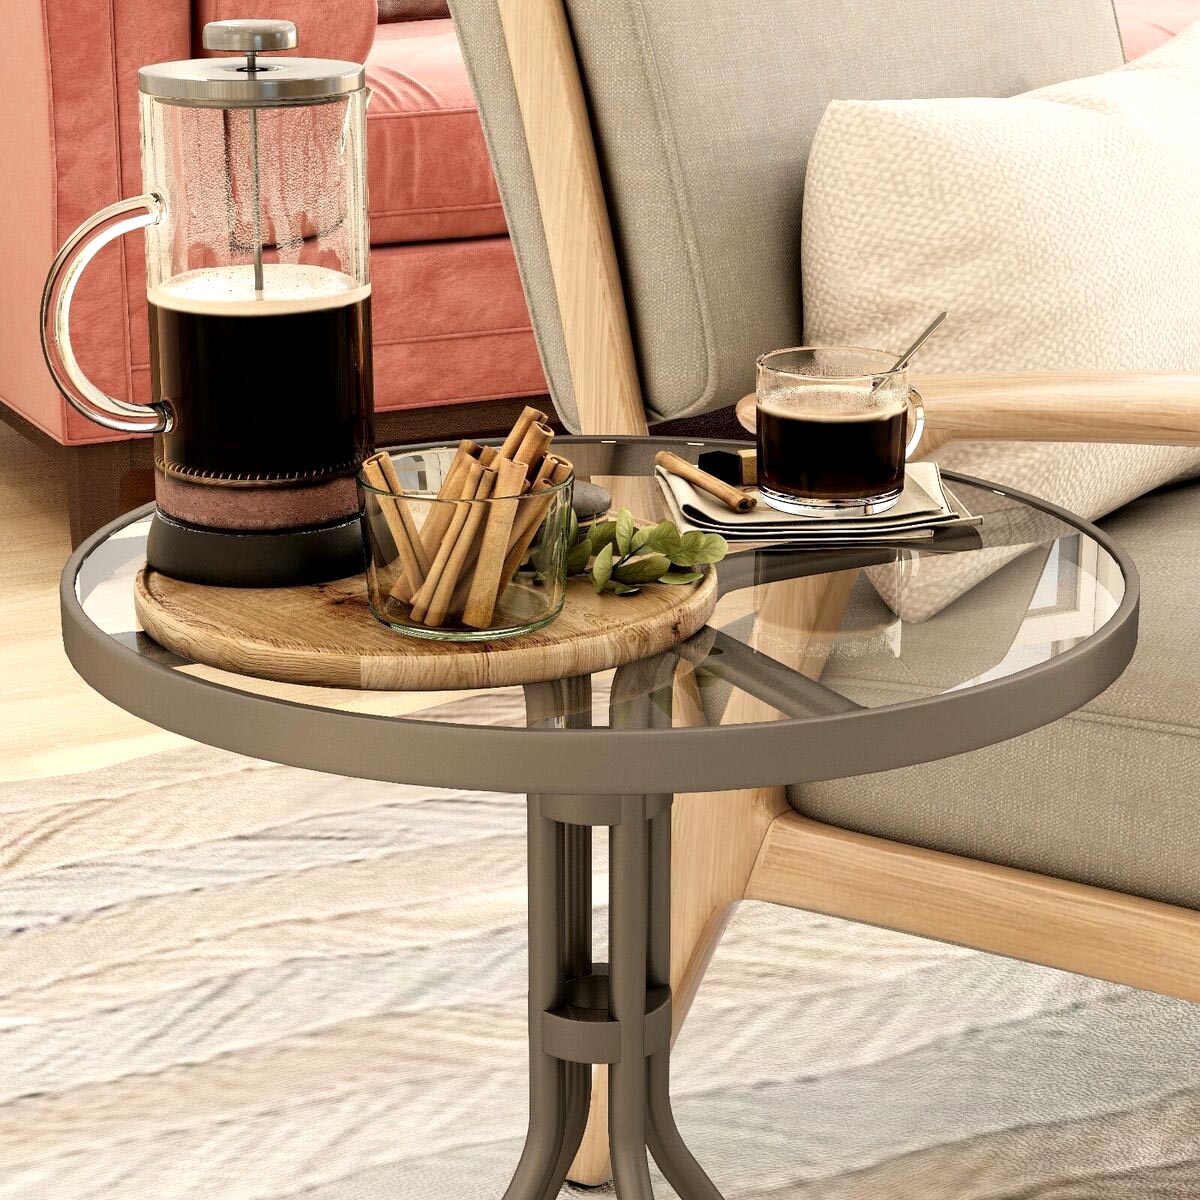 Where Can I Buy Replacement Glass For Coffee Table